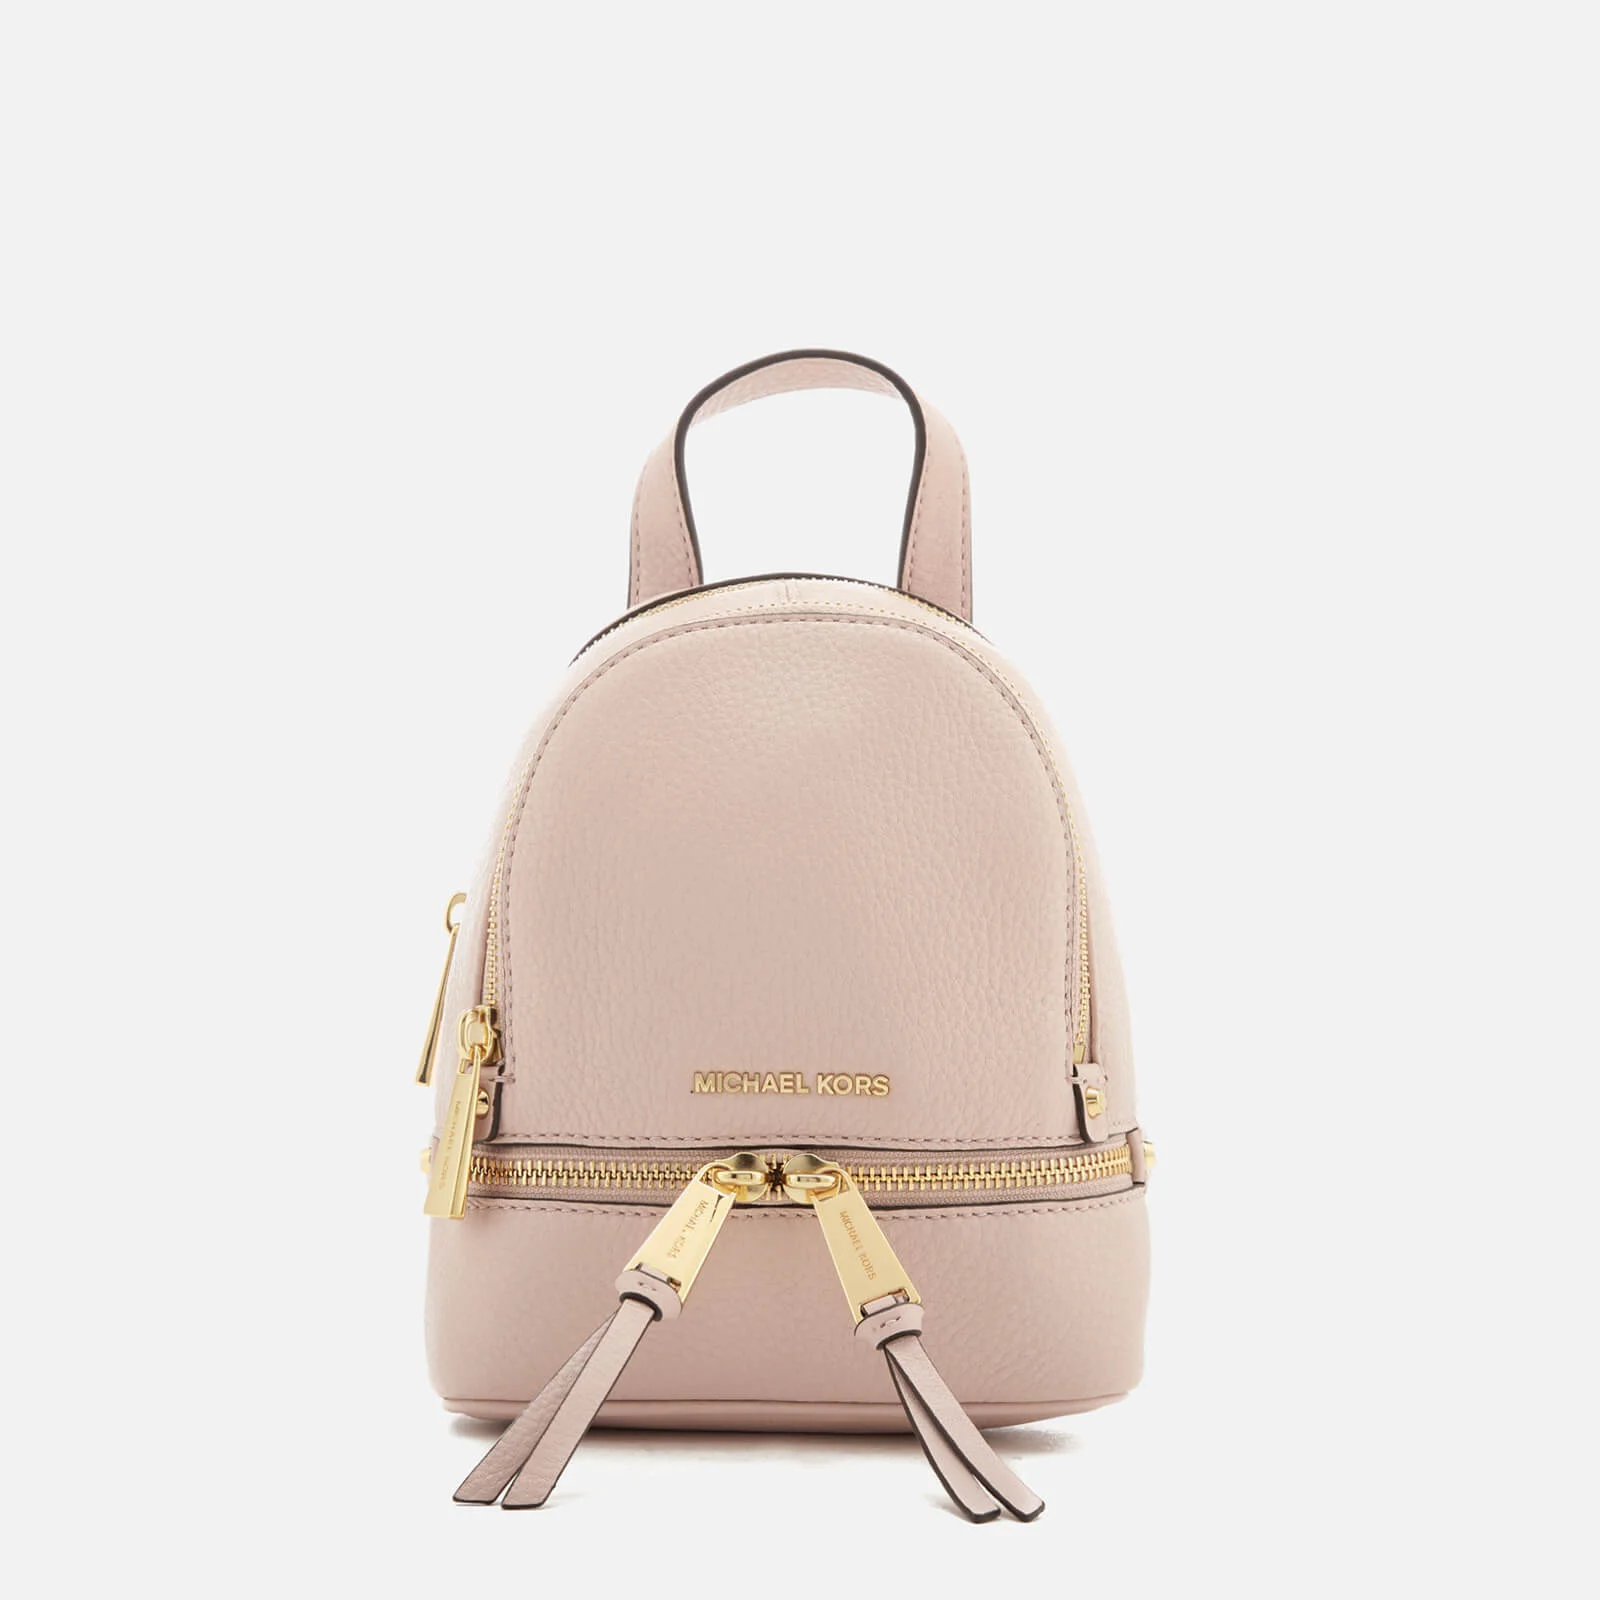 MICHAEL MICHAEL KORS Women's Extra Small Messenger Backpack - Soft Pink Image 1